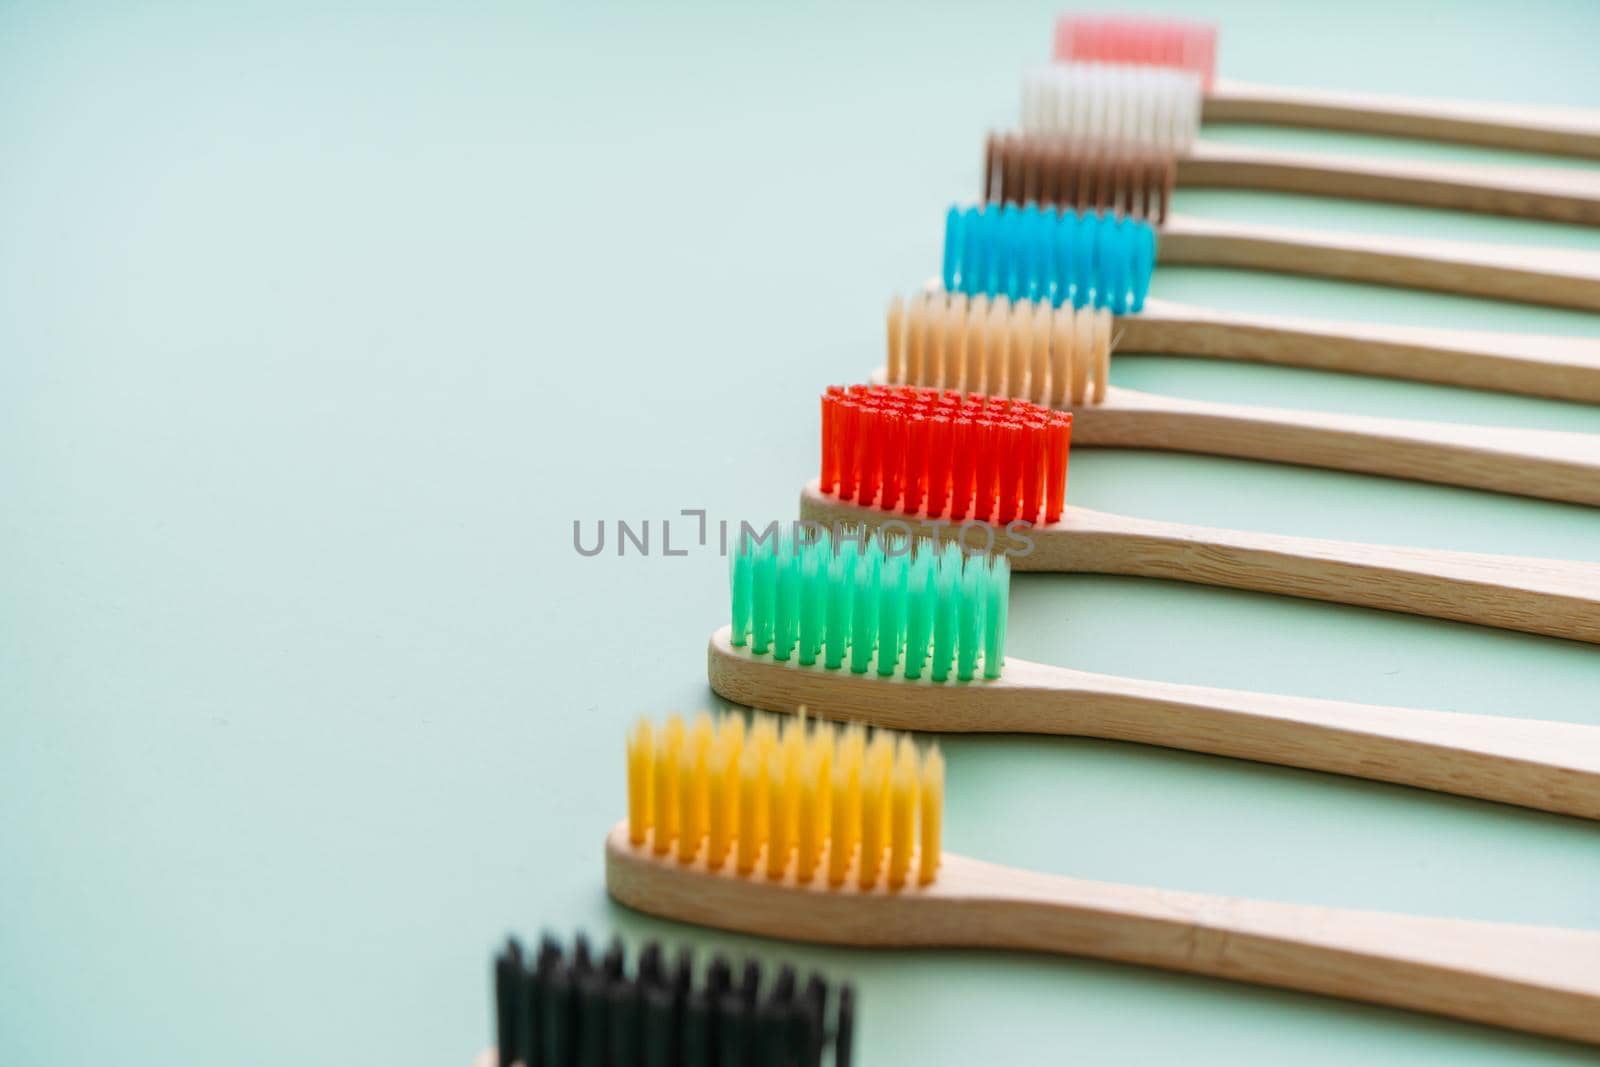 A set of Eco-friendly antibacterial toothbrushes made of bamboo wood on a light green background. Environmental care trends.